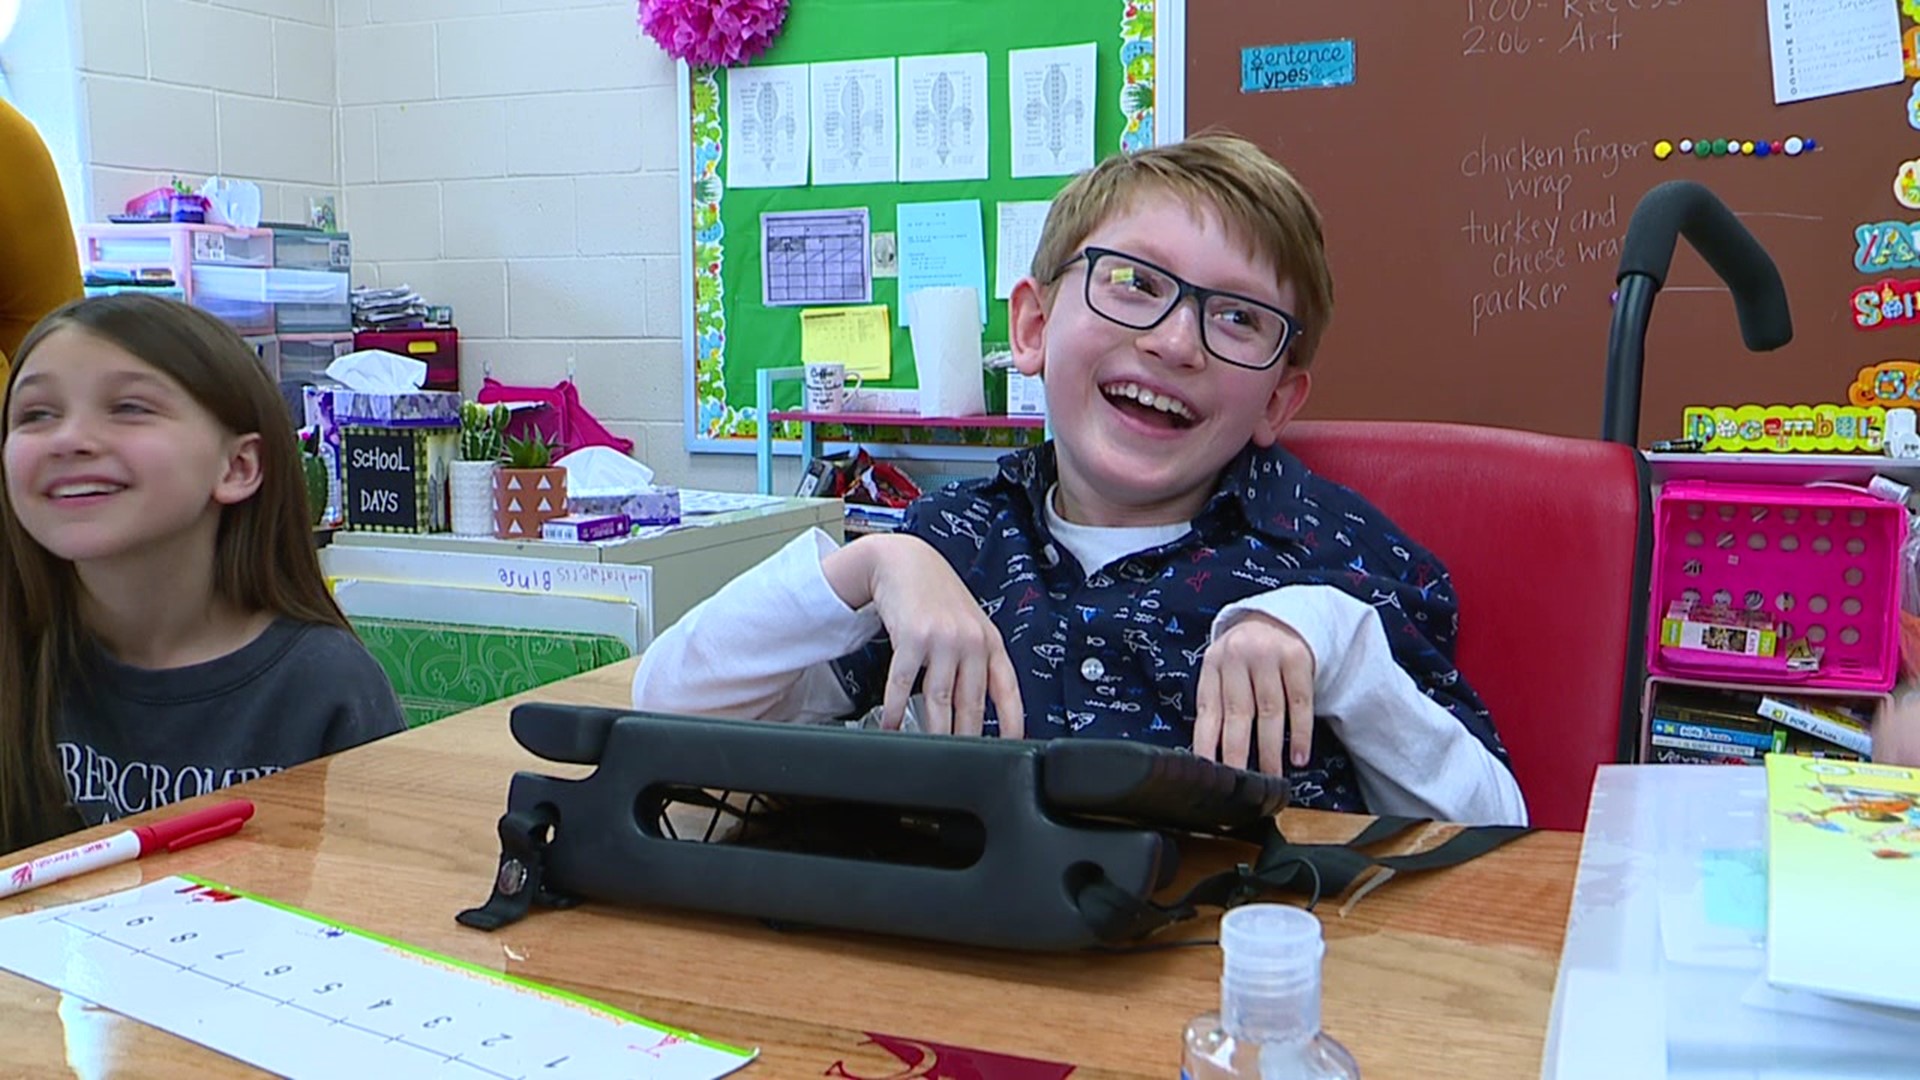 Students from the Schuylkill Technology Center worked together to build an elementary student a one-of-a-kind desk that's wheelchair accessible.